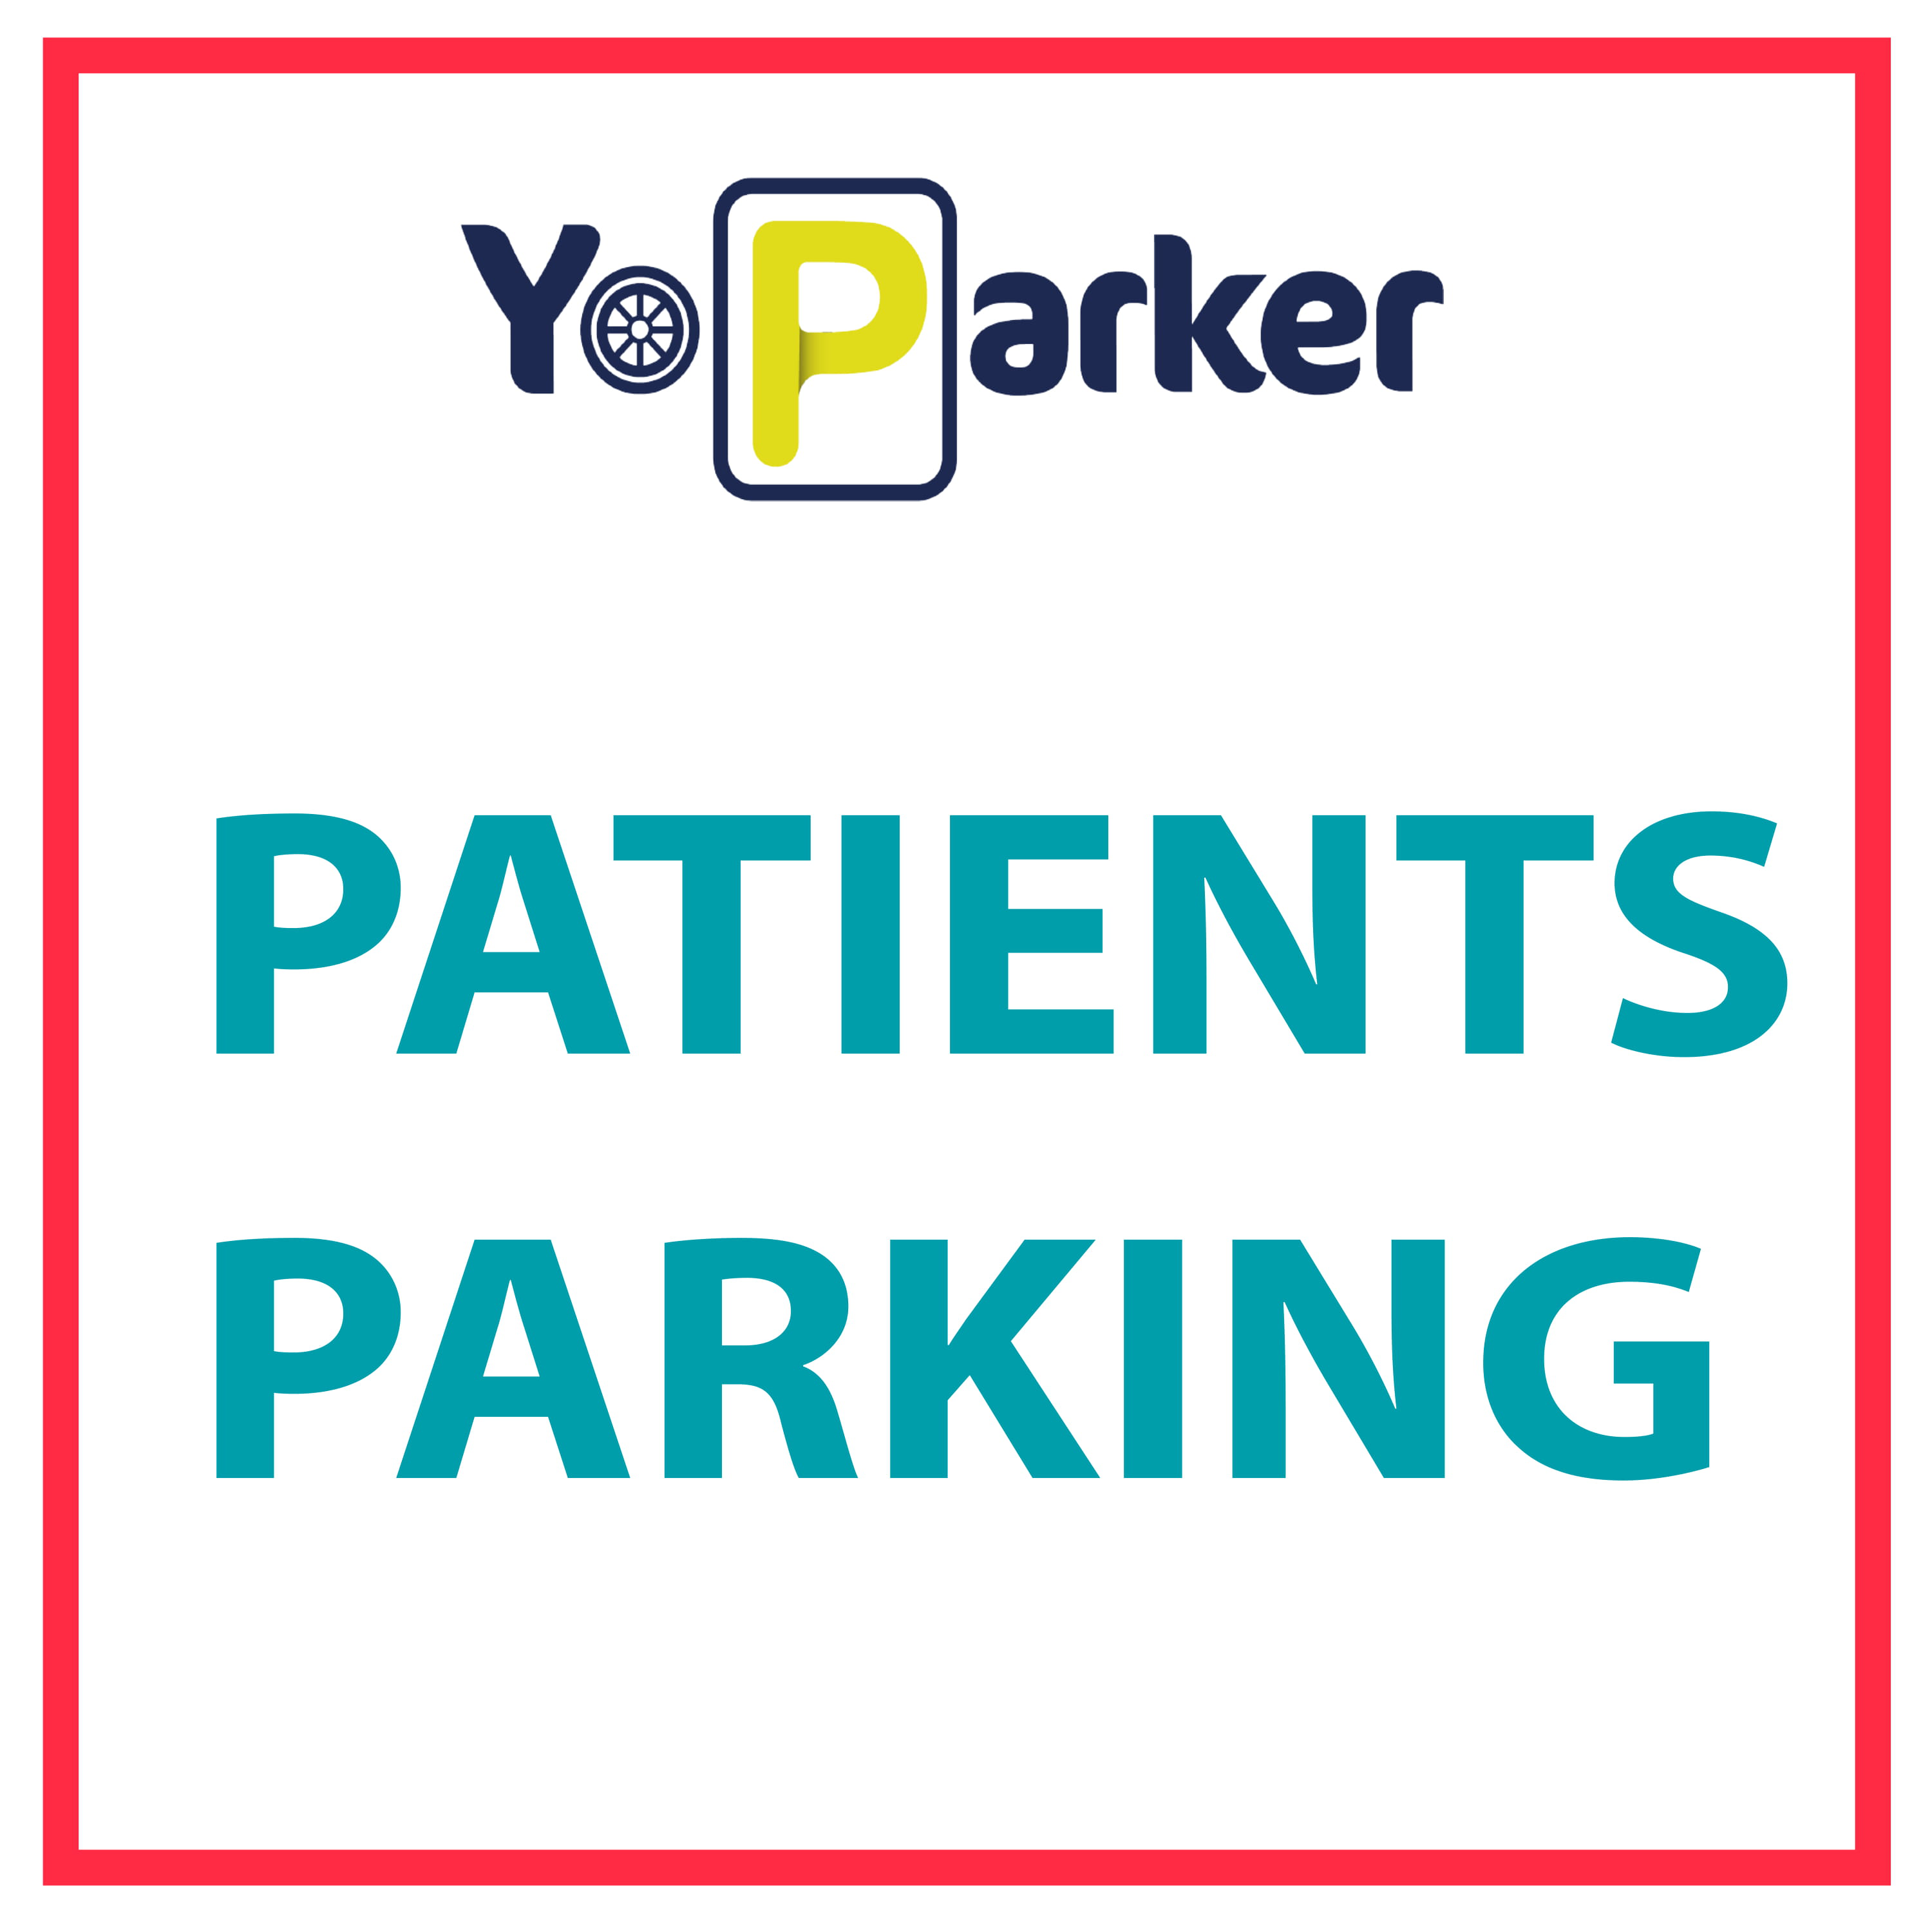 Increasing demand for Vehicle carrying Patients Pa